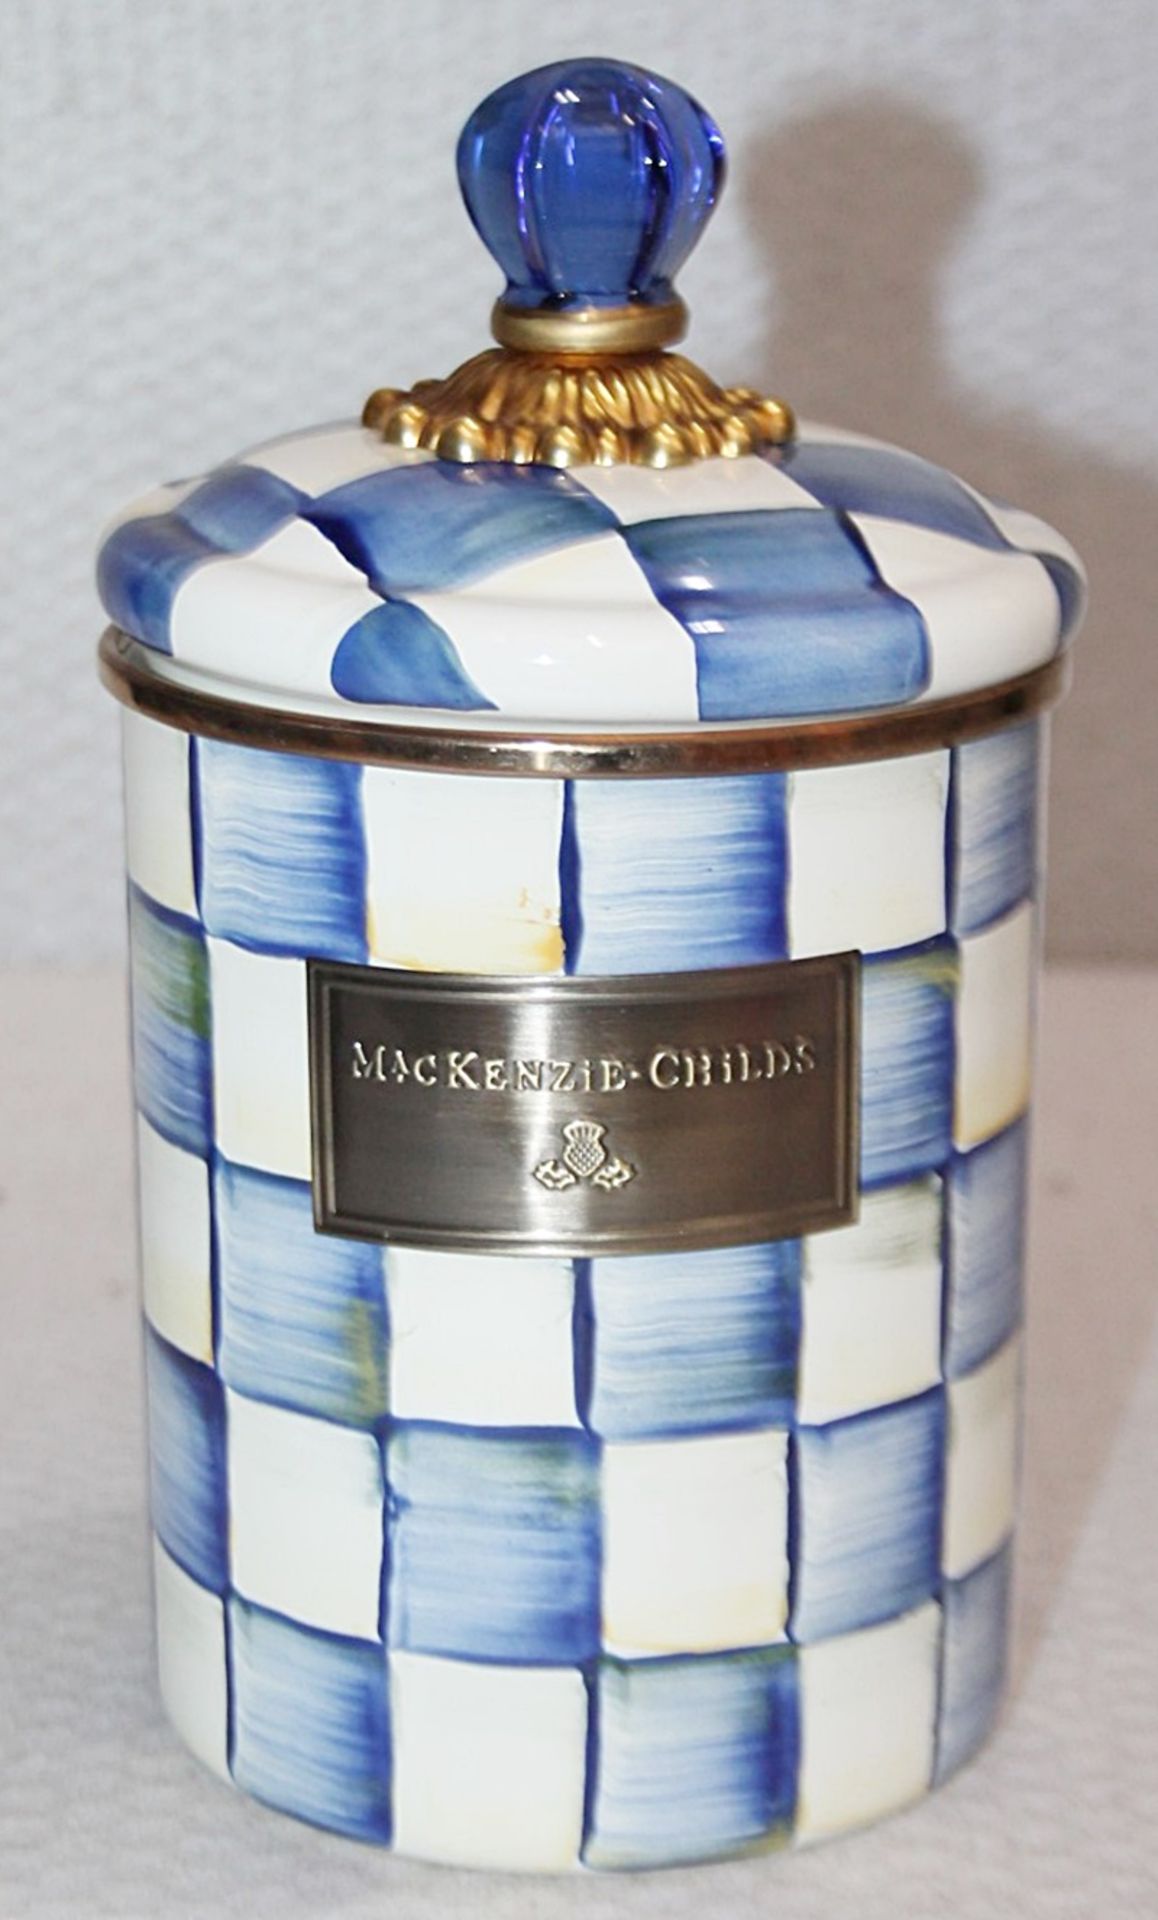 1 x MACKENZIE-CHILDS Handpainted 'Royal Check' Canister - Original Price £104.00 *Read Condition - Image 2 of 7